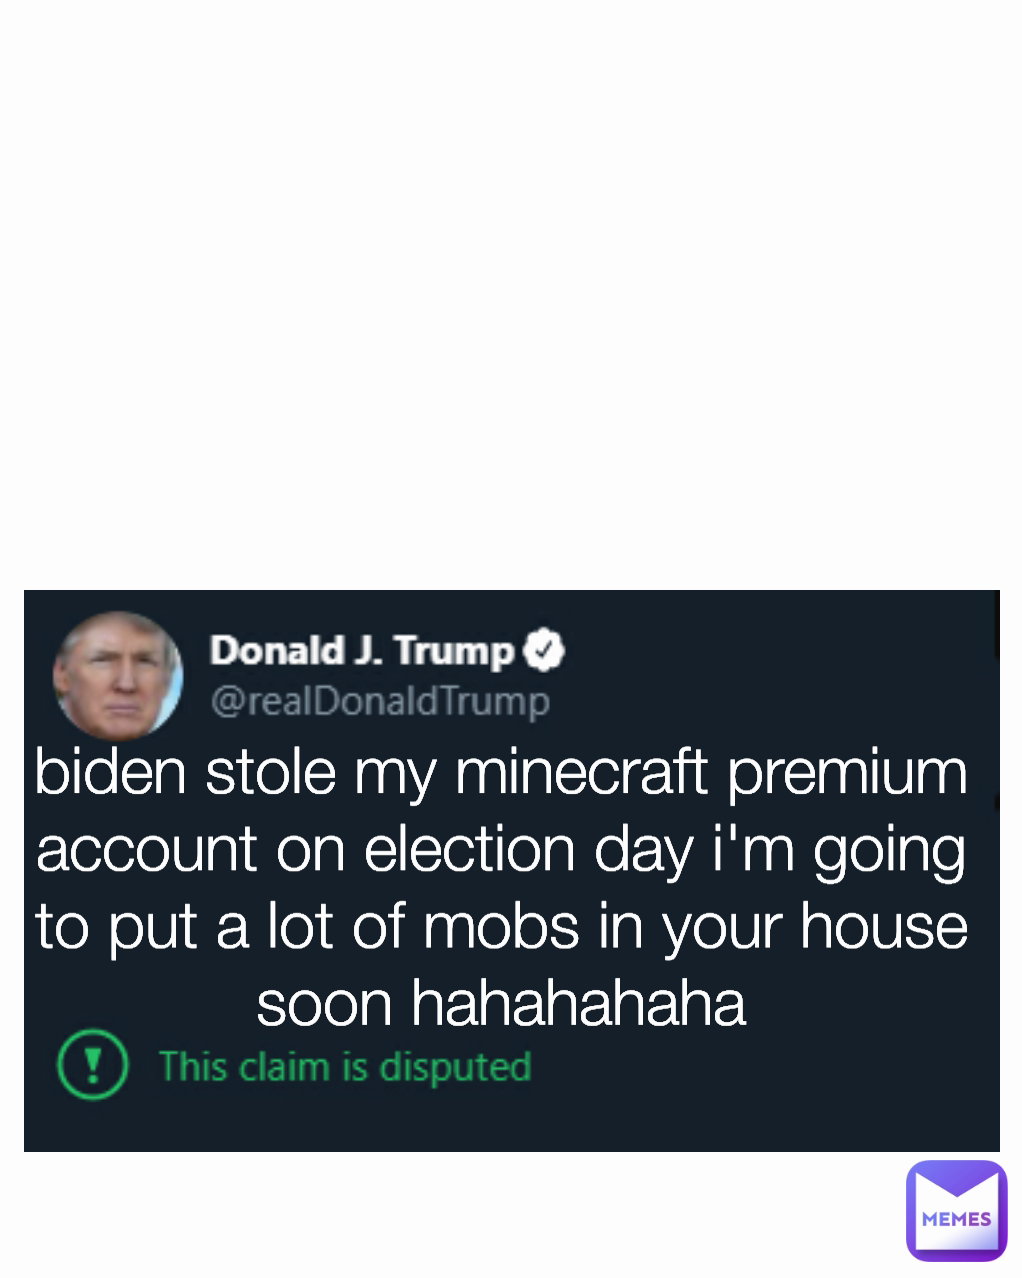 biden stole my minecraft premium account on election day i'm going to put a lot of mobs in your house soon hahahahaha